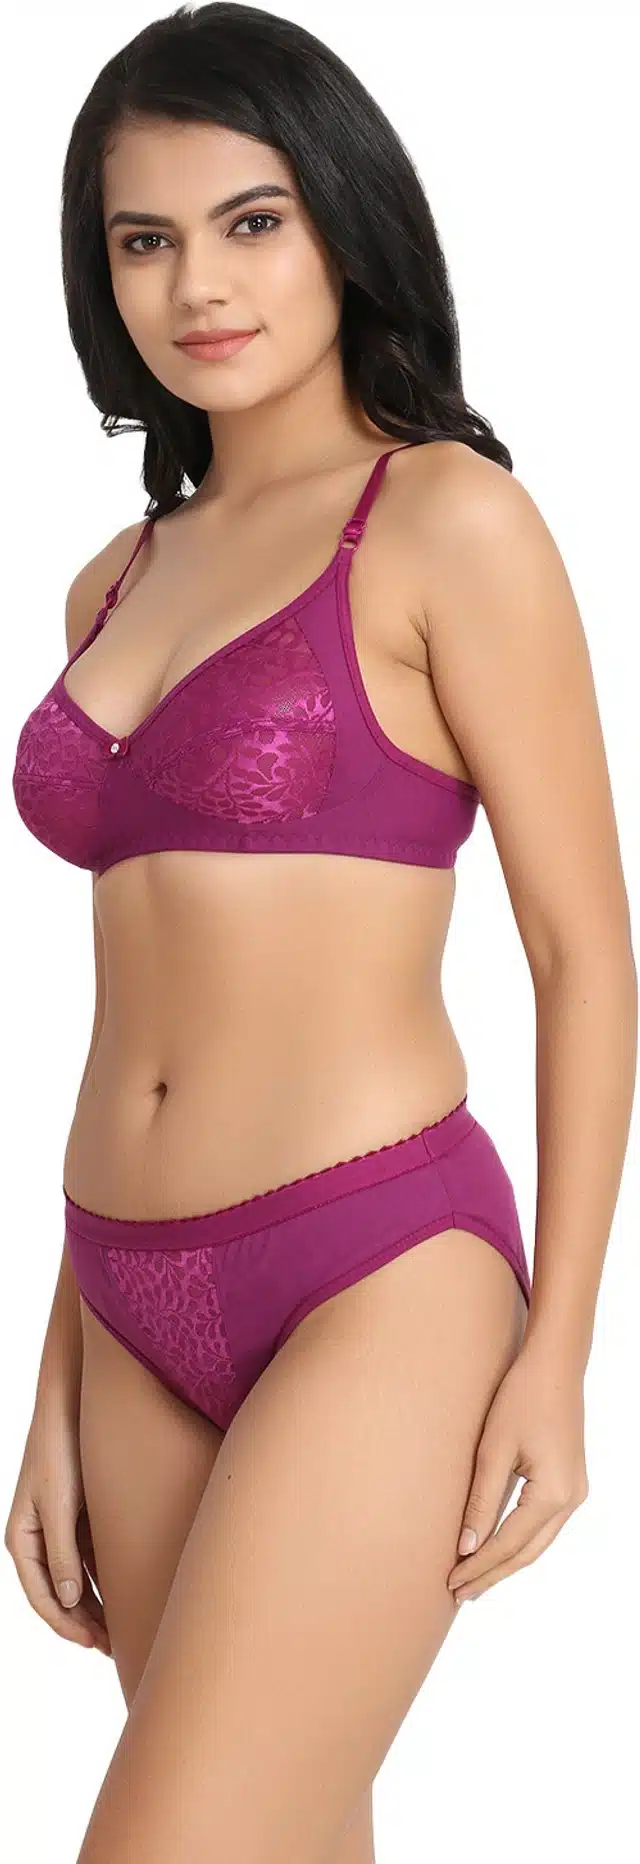 Buy Women's Lingerie Sets Online at CityMall - Top Lingerie Collection